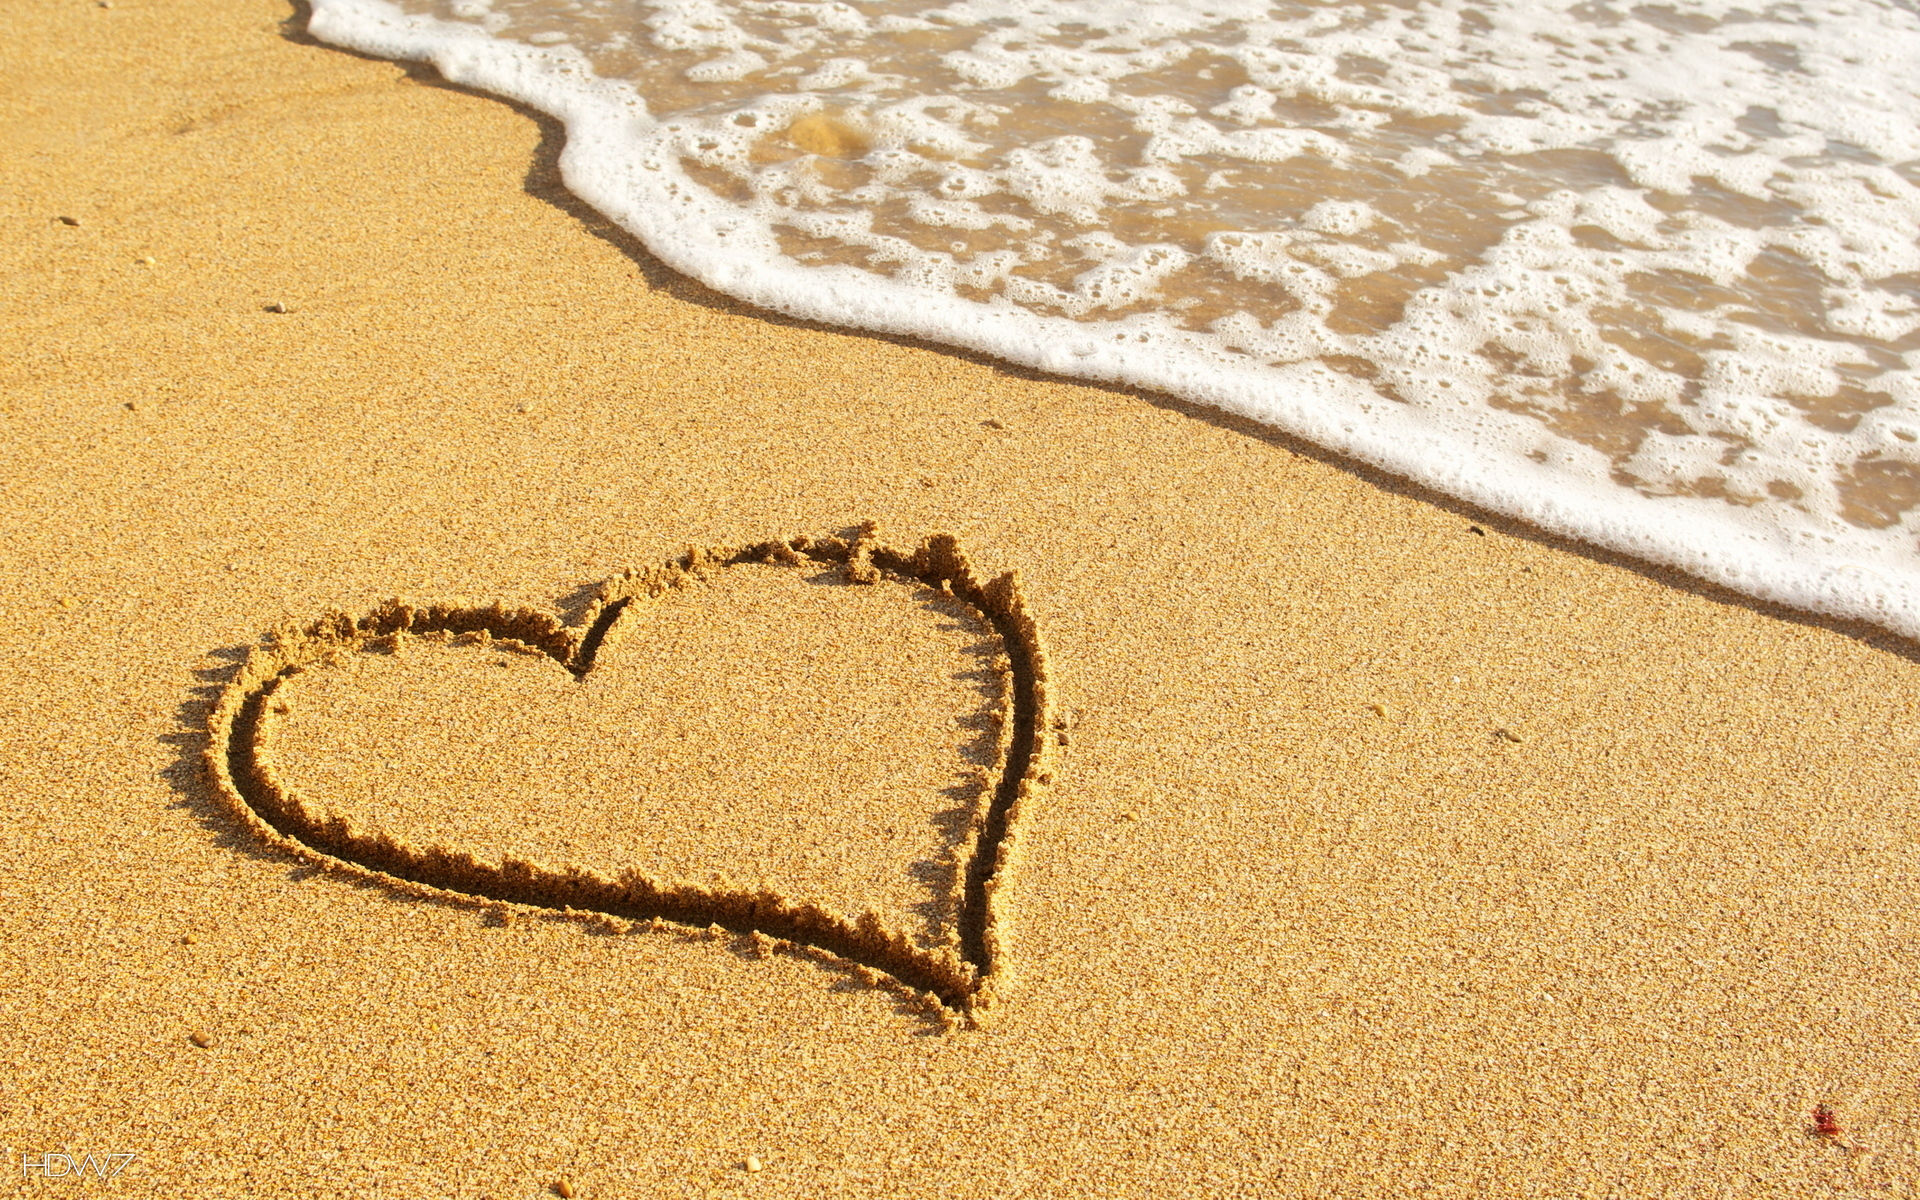 heart drawn in the sand on the beach | HD wallpaper gallery #18